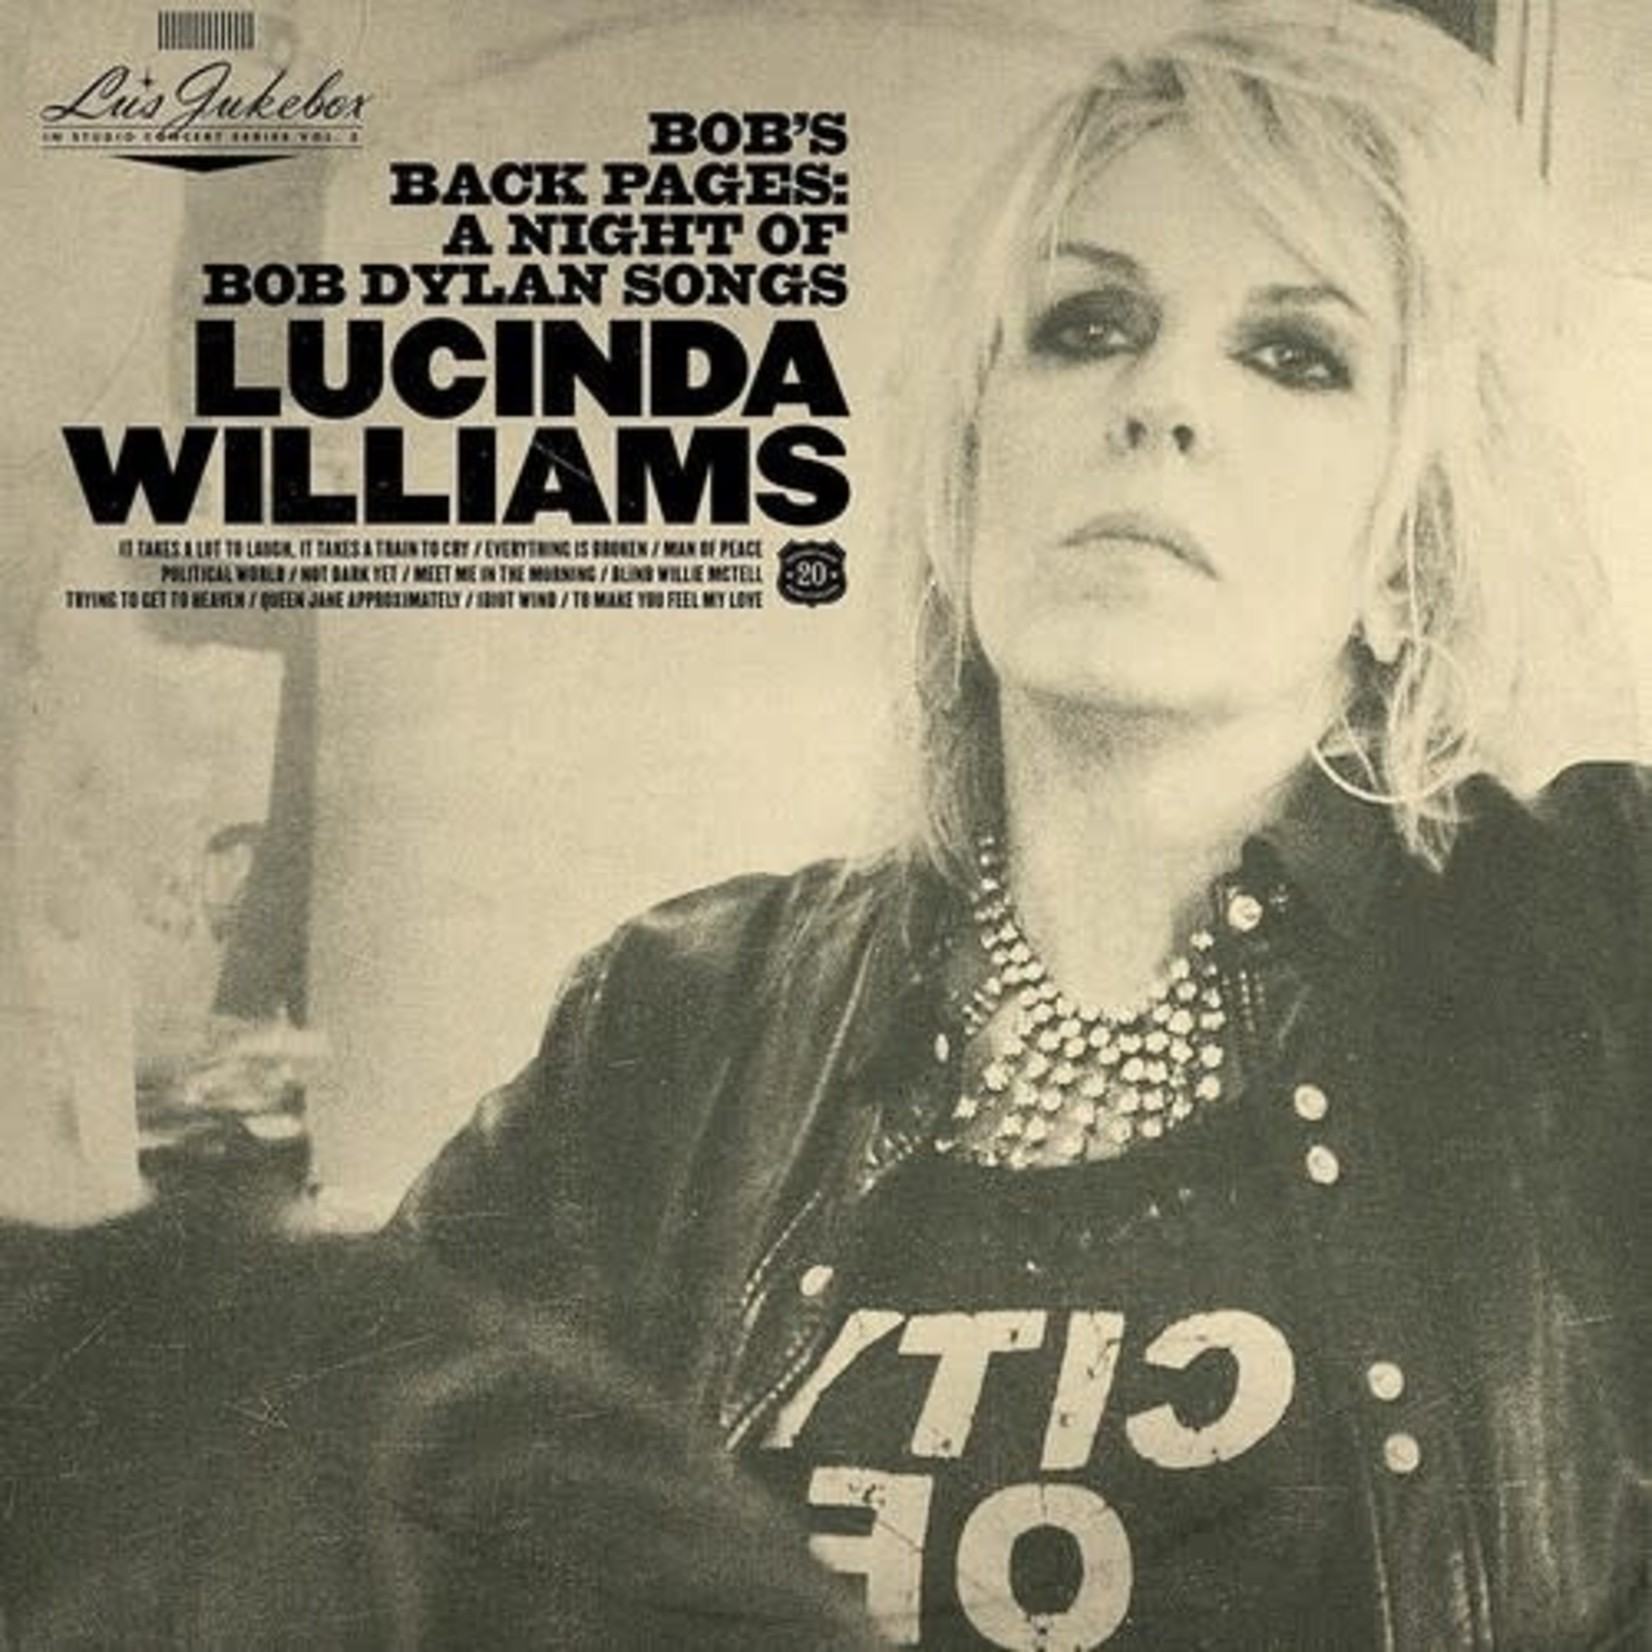 Lucinda Williams - Lu's Jukebox Vol. 3: Bob's Back Pages: A Night Of Bob Dylan Songs (2LP)